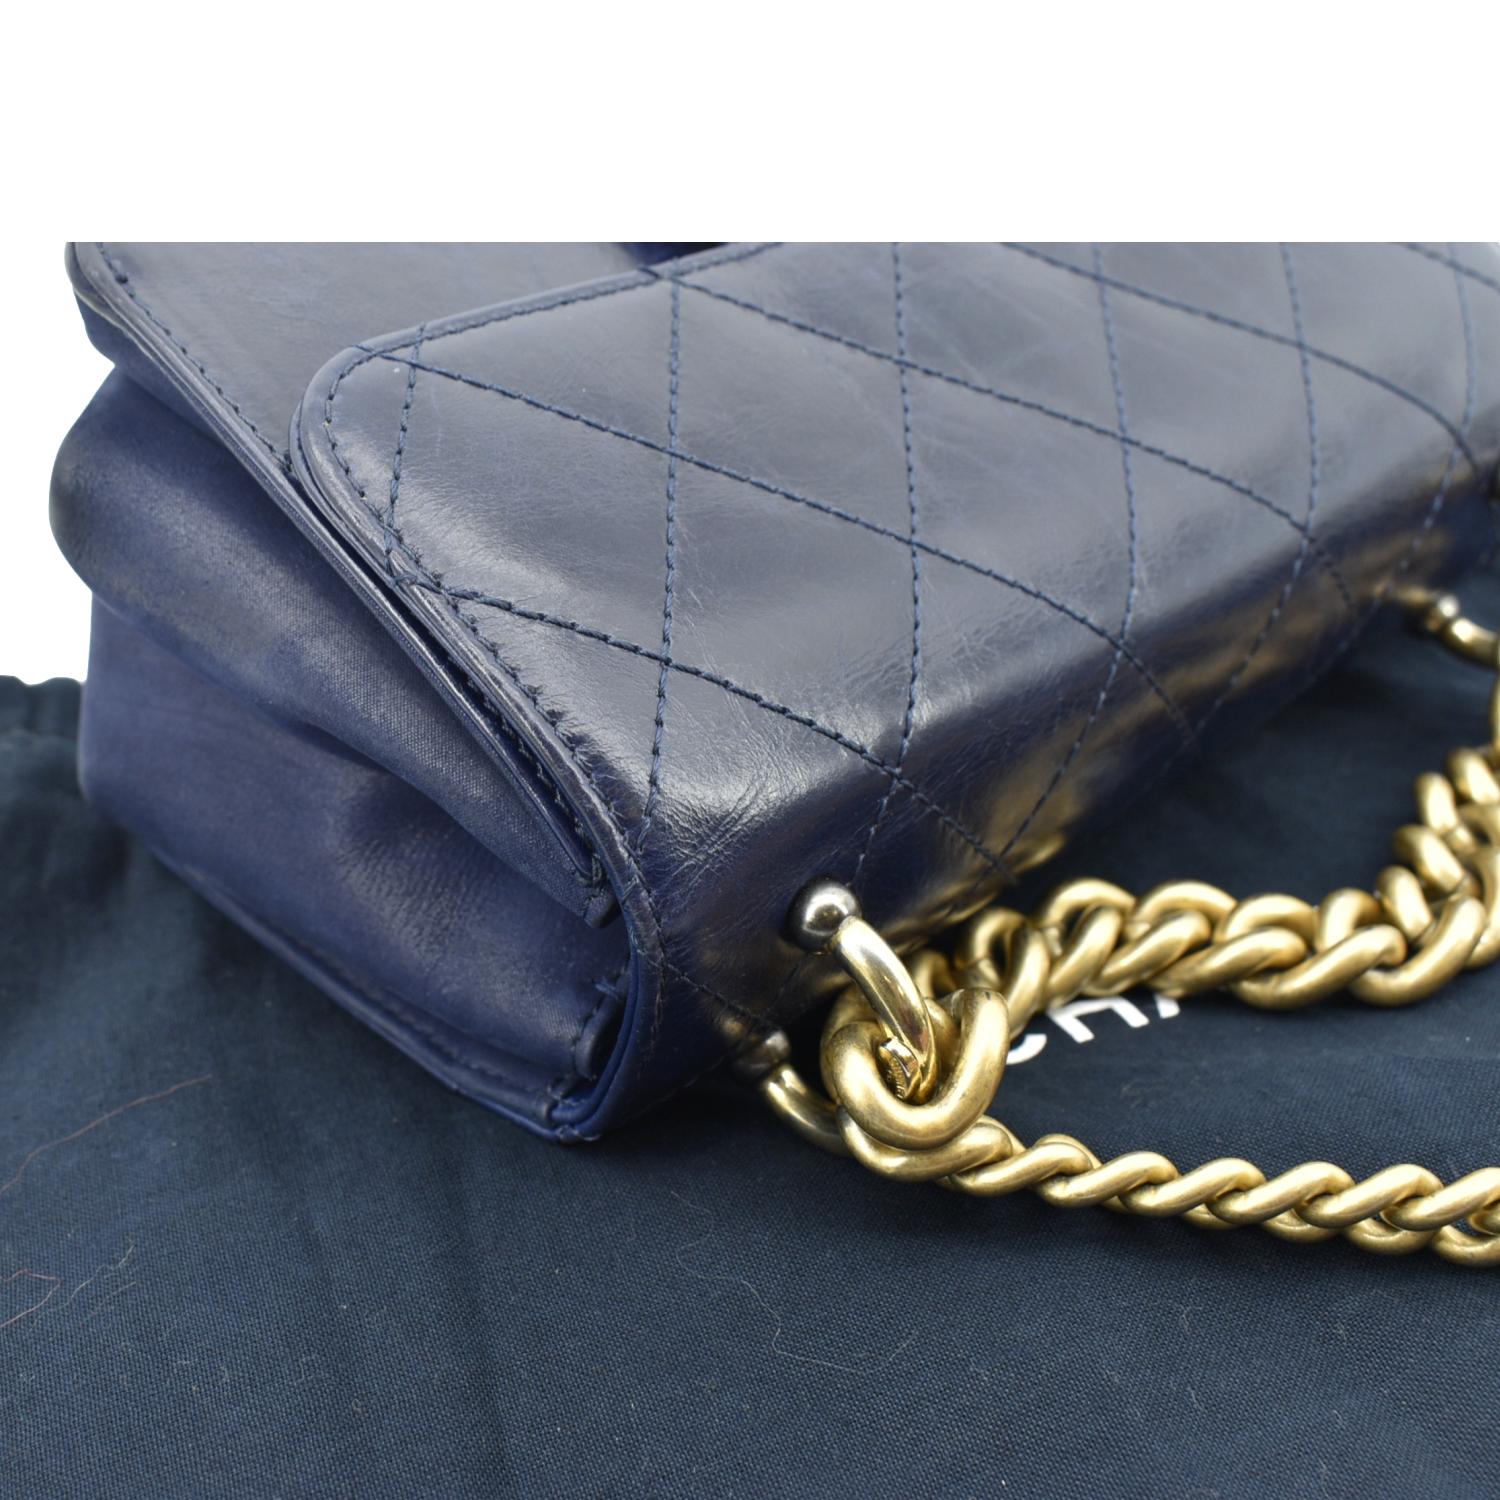 Quilted Chanel Bag W/ Embossed Cc Design & Chains/leather Straps